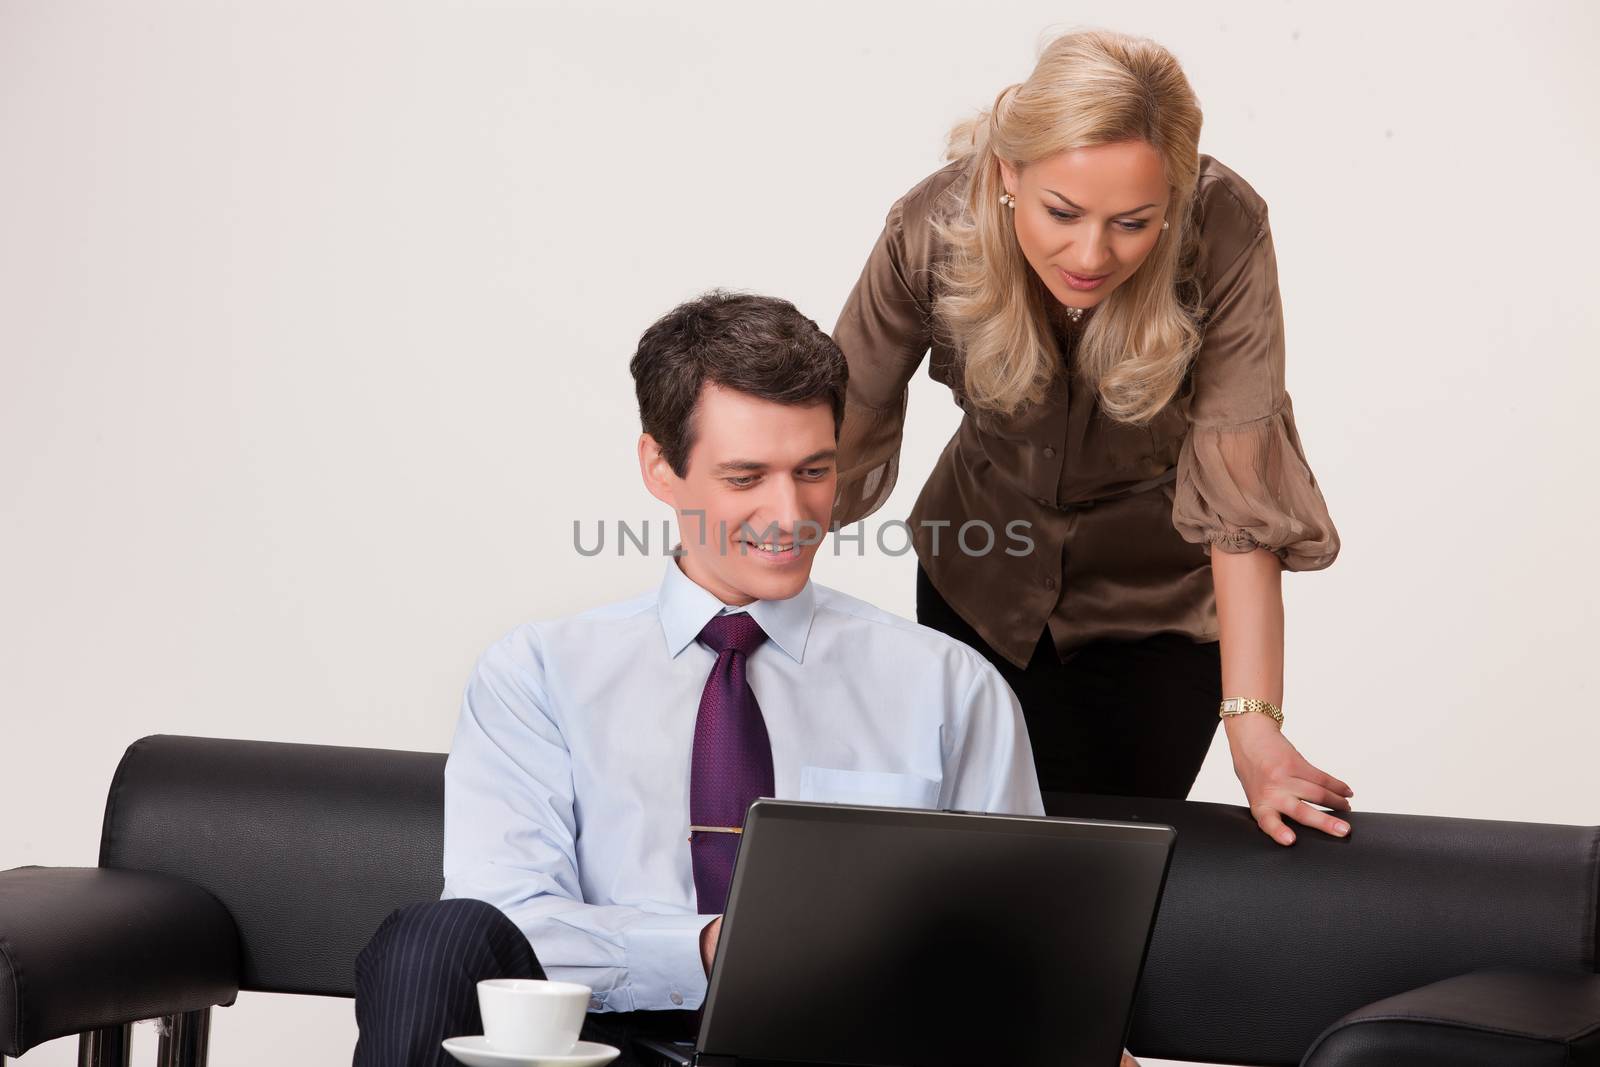 Young man and woman in business situation